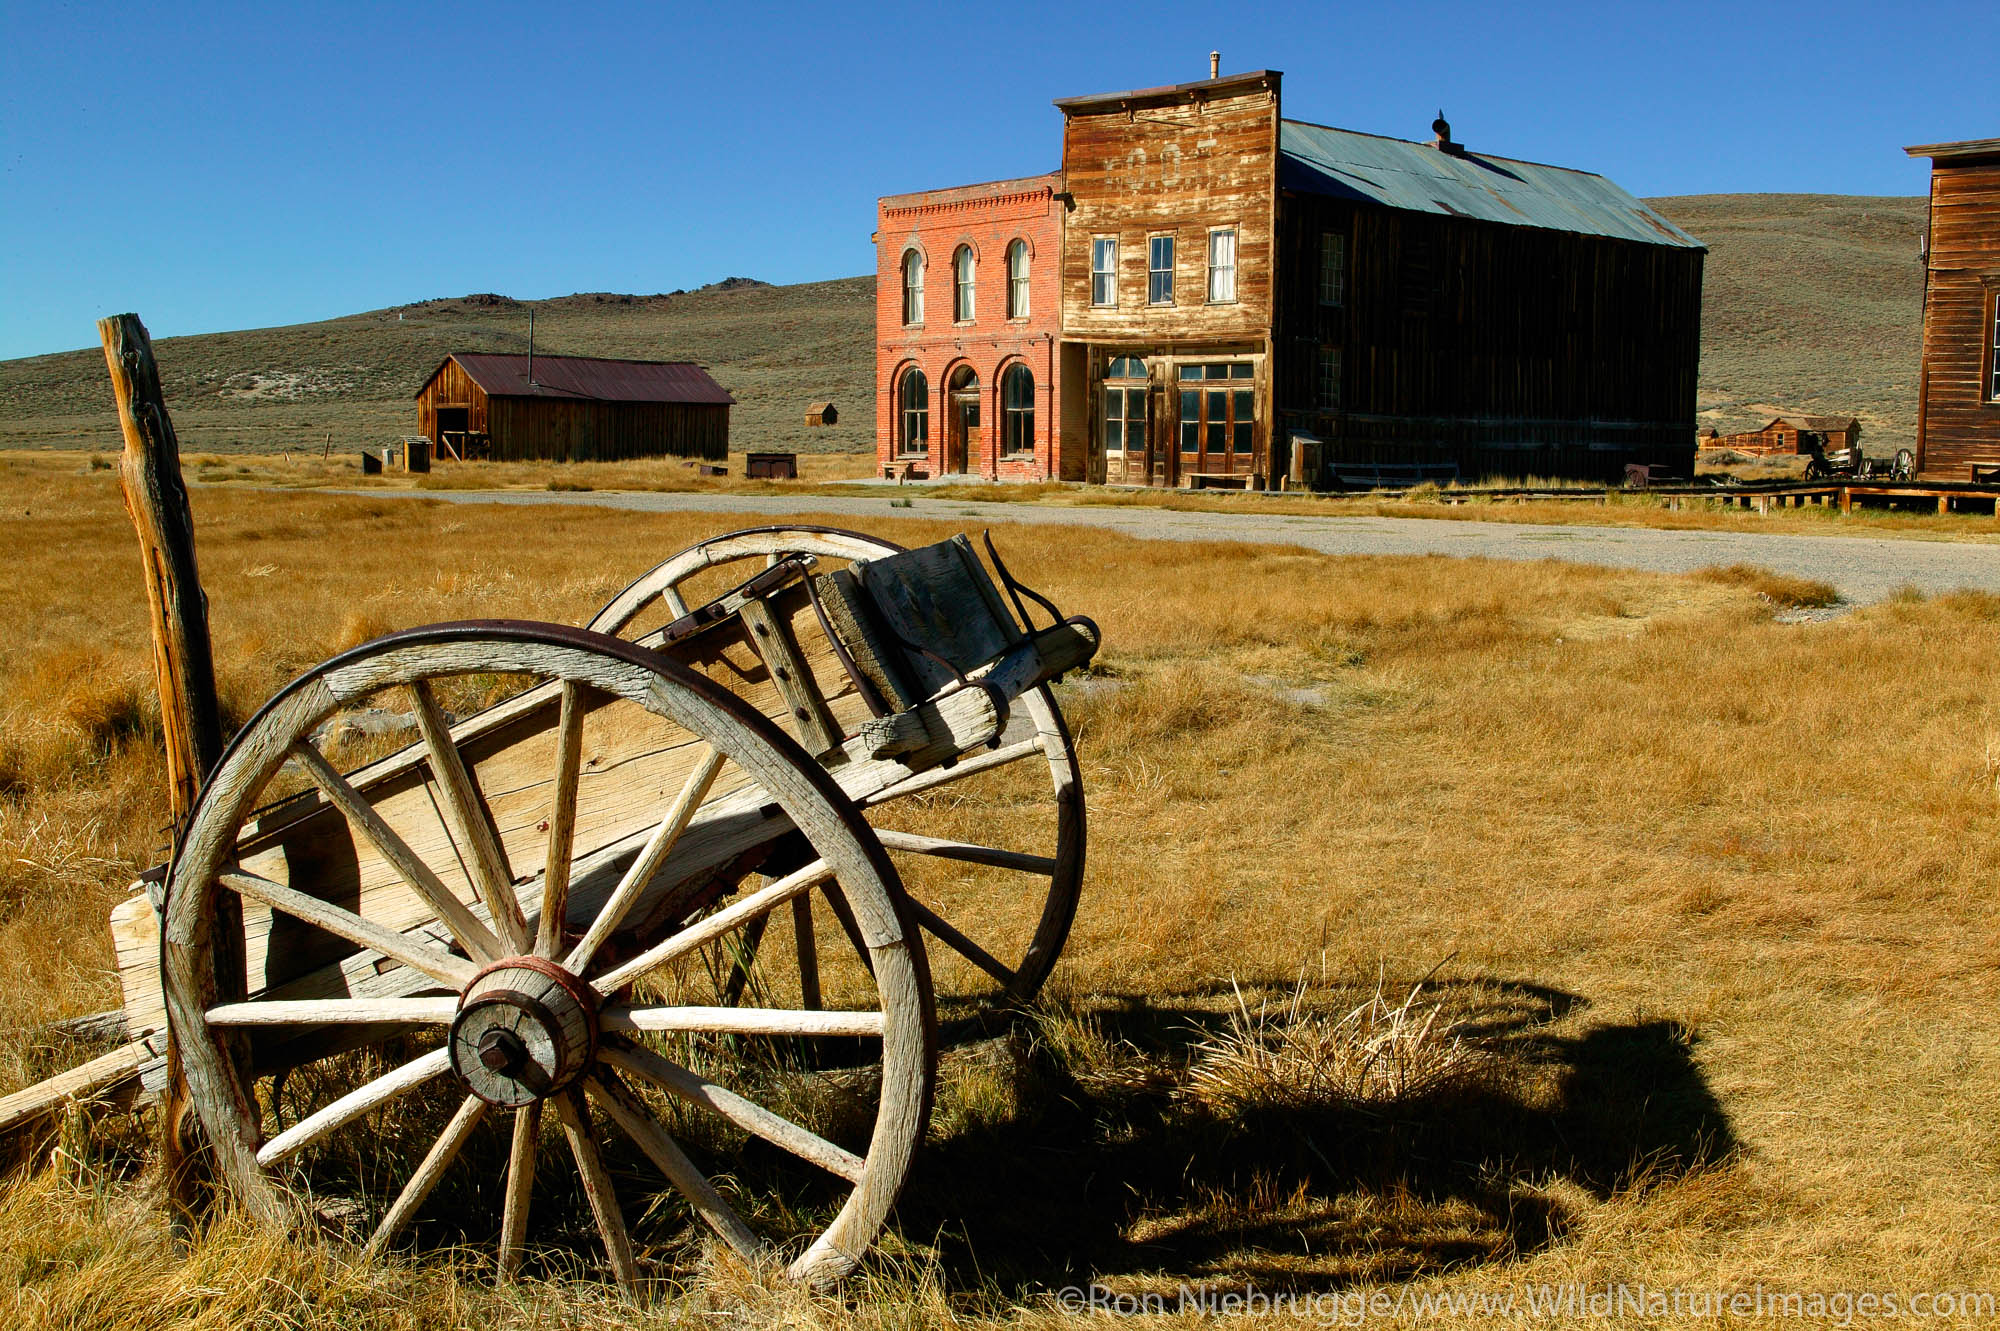 The historic ghost town of Bodie was once bustling gold mining town, Bodie State Historic Park, California.